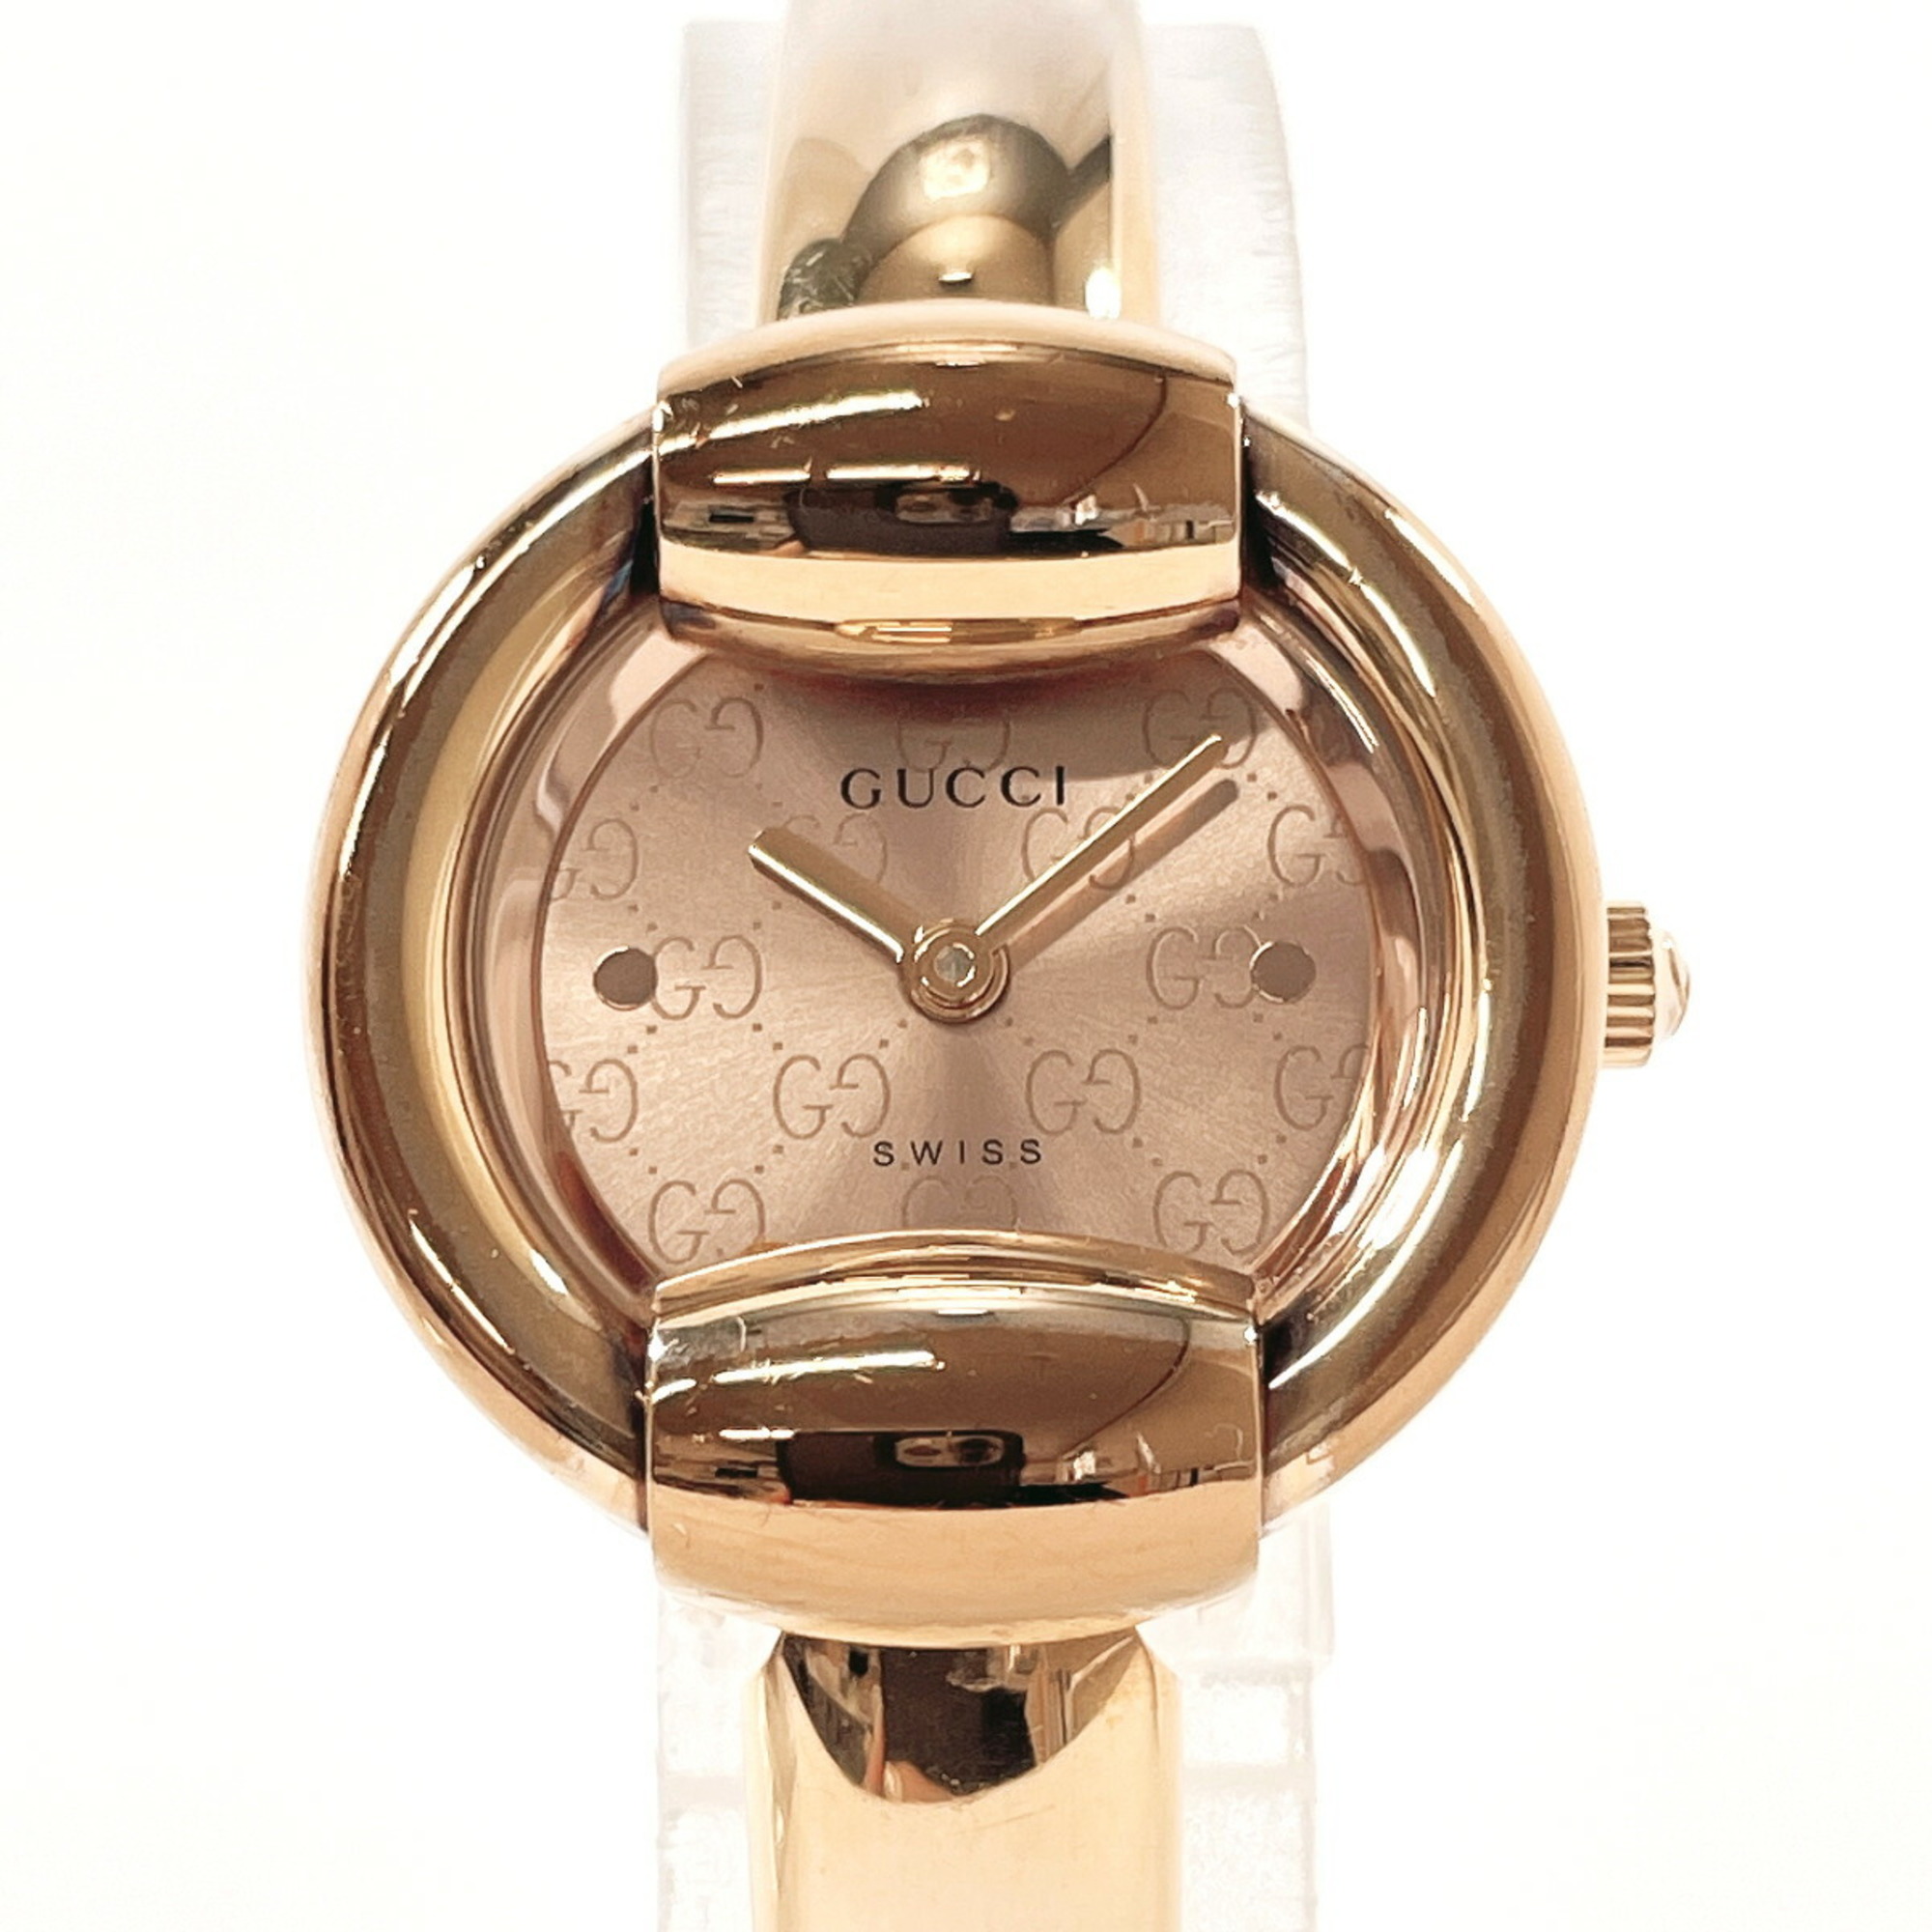 GUCCI 1400L Watch Stainless Steel/Stainless Steel Gold Quartz Dial Women's F4034265